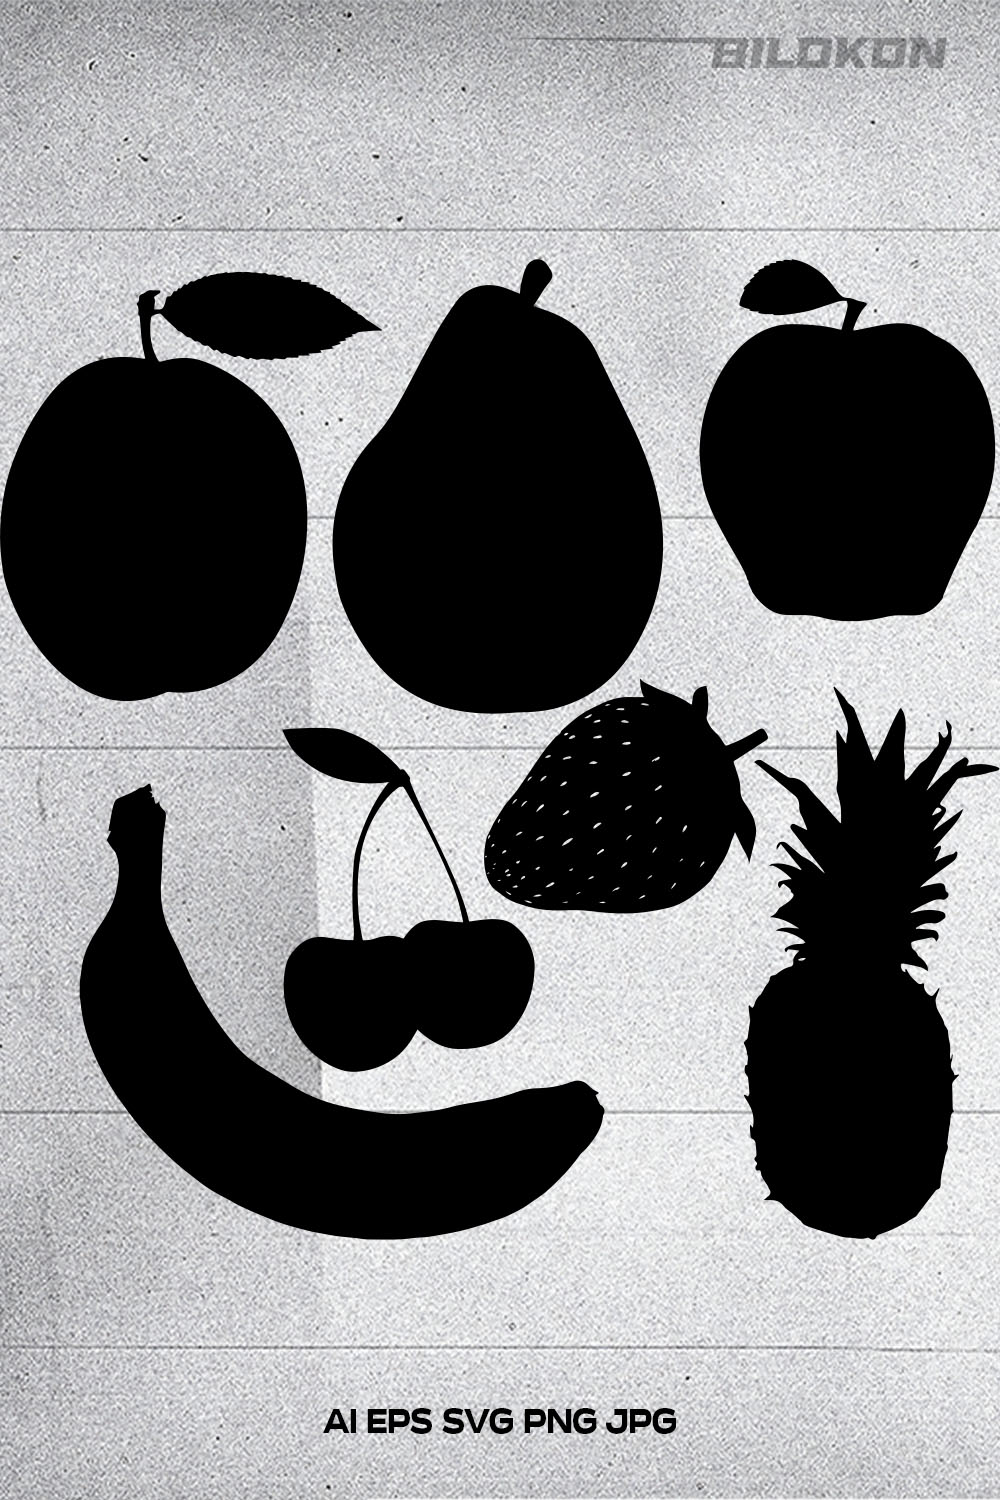 Fruits silhouette set, SVG Vector pinterest preview image.